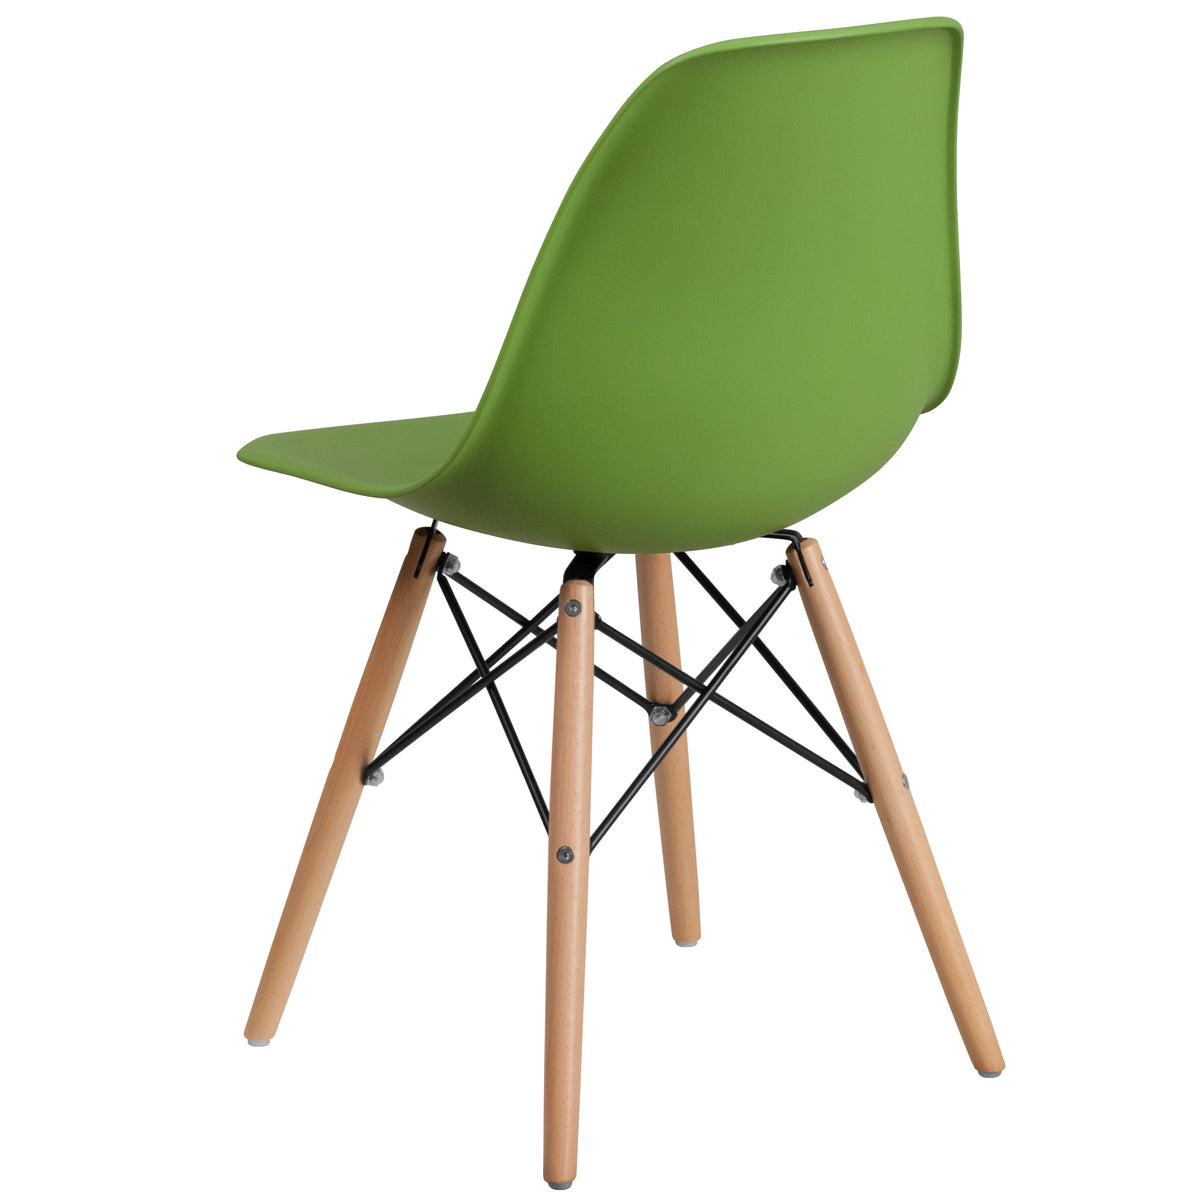 Green |#| Green Plastic Chair with Wooden Legs - Hospitality Seating - Side Chair